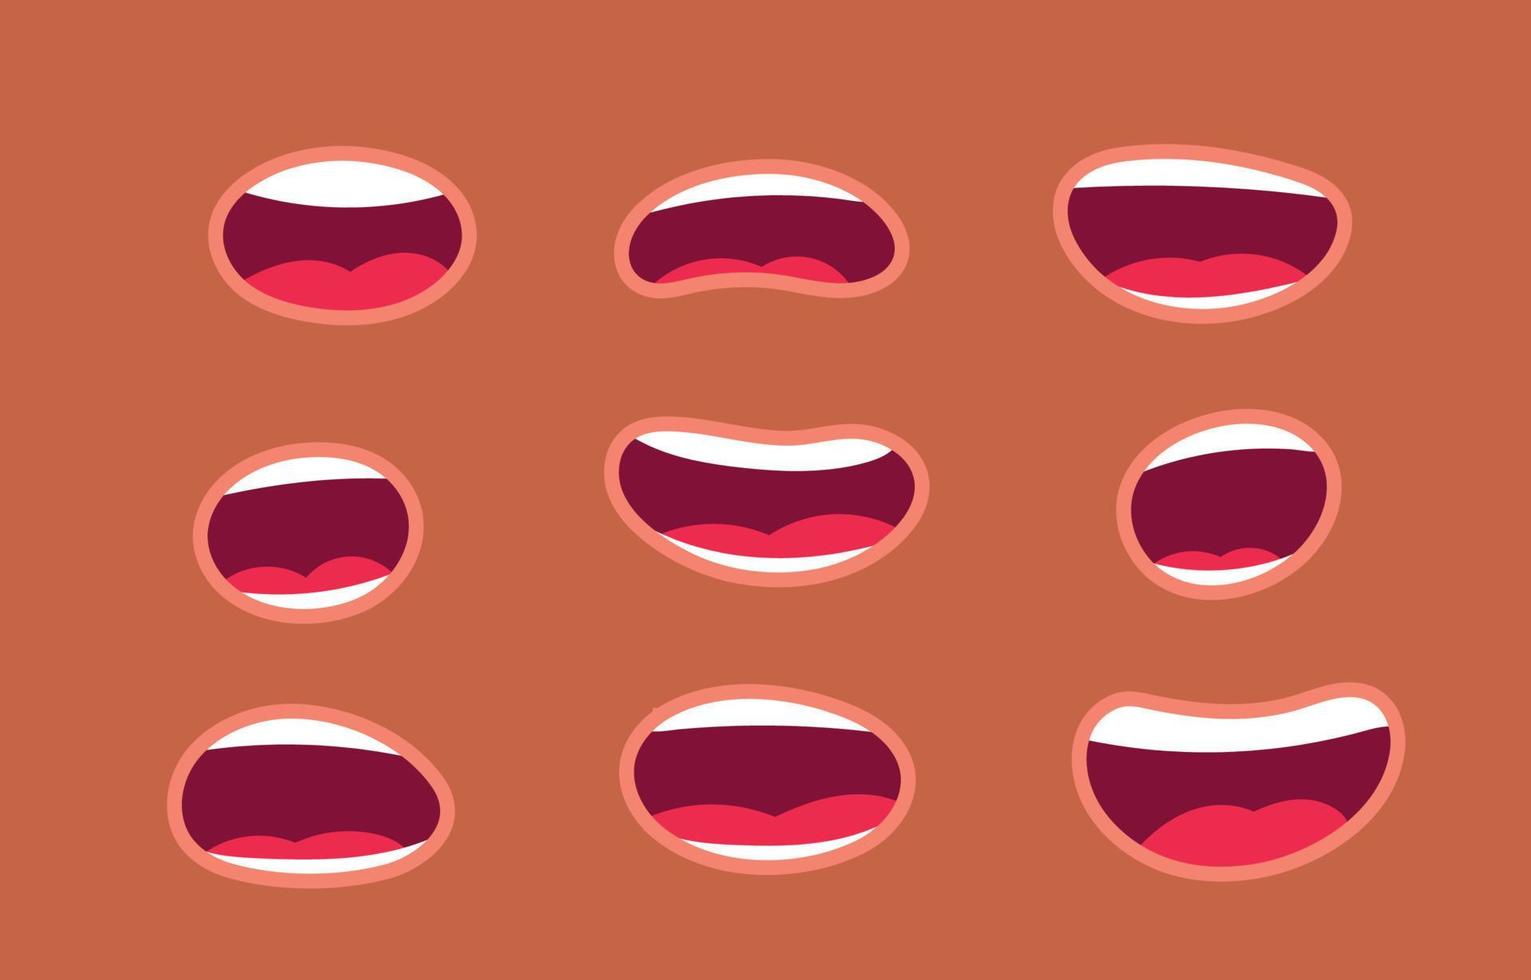 Big set of animation funny cartoon mouths with different expressions and emotions smile, angry, laugh, surprised. vector